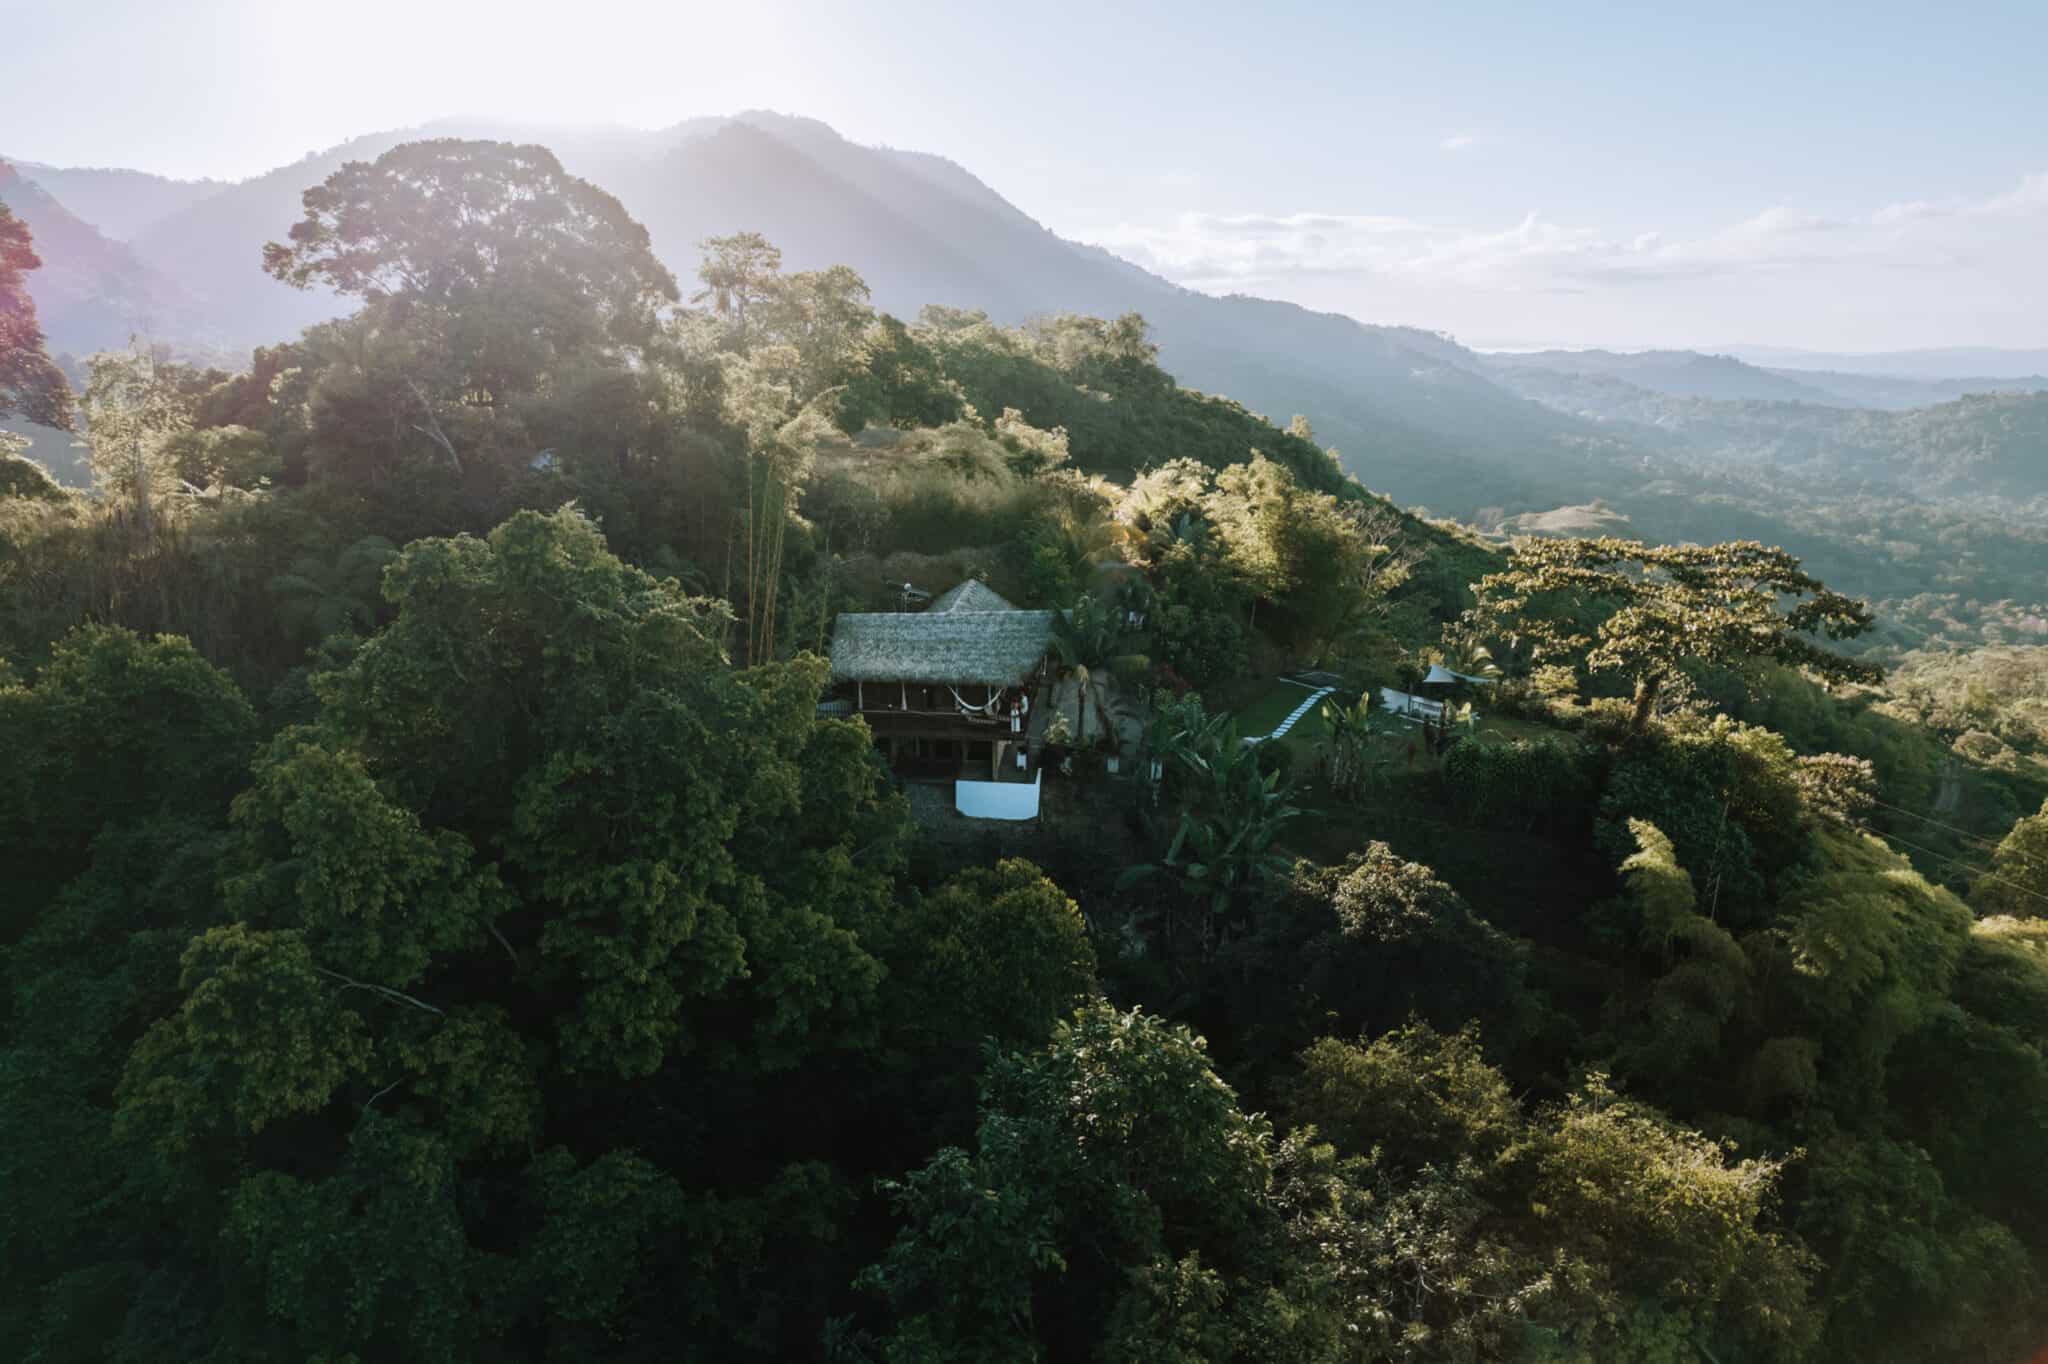 Work with us to capture an aerial view of a house in the jungle.